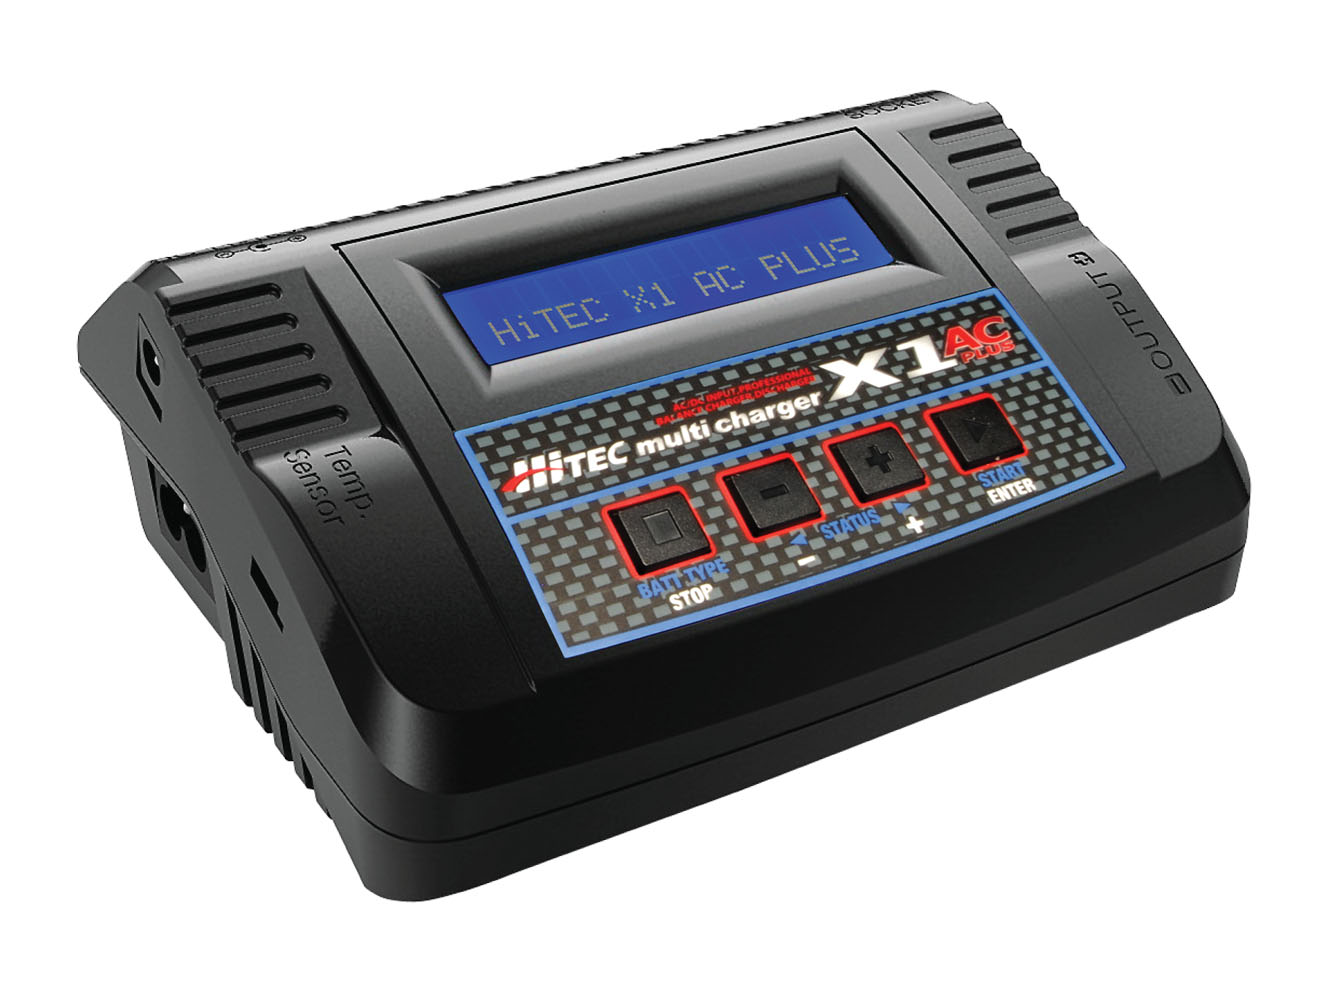 X1 AC Plus battery charger from Hitec